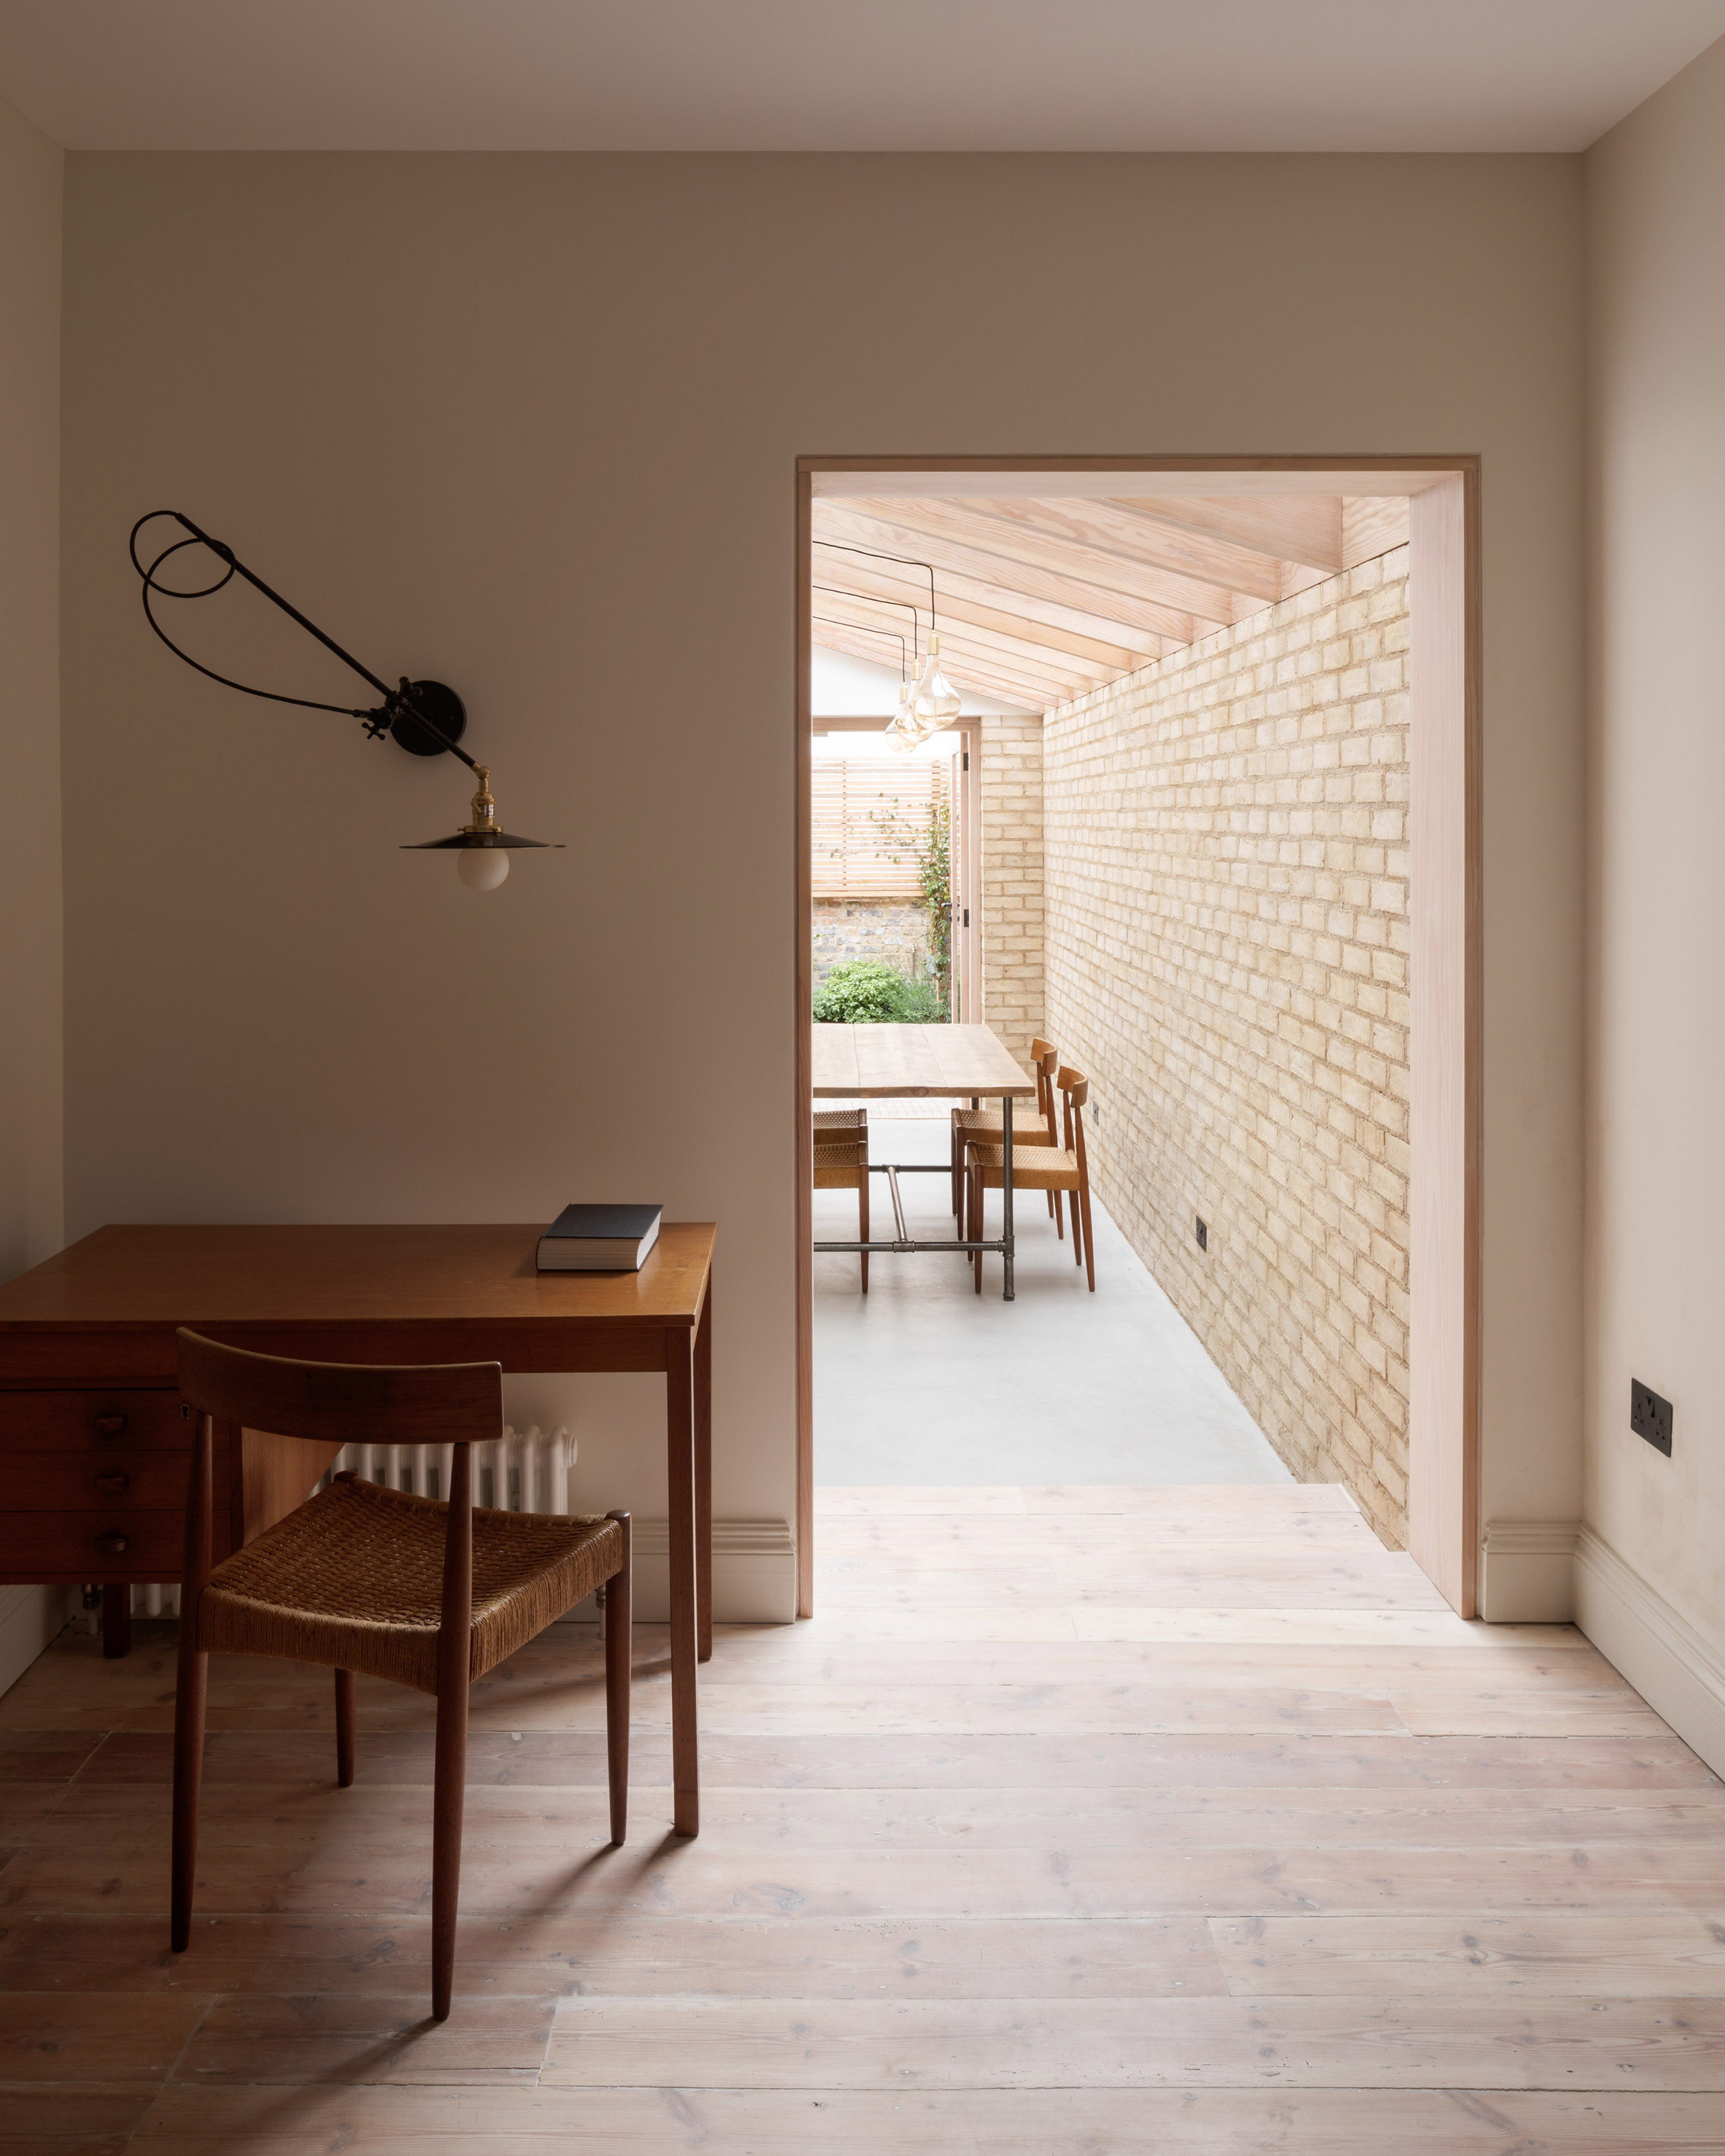 Vestry Road house extension by Oliver Leech Architects study